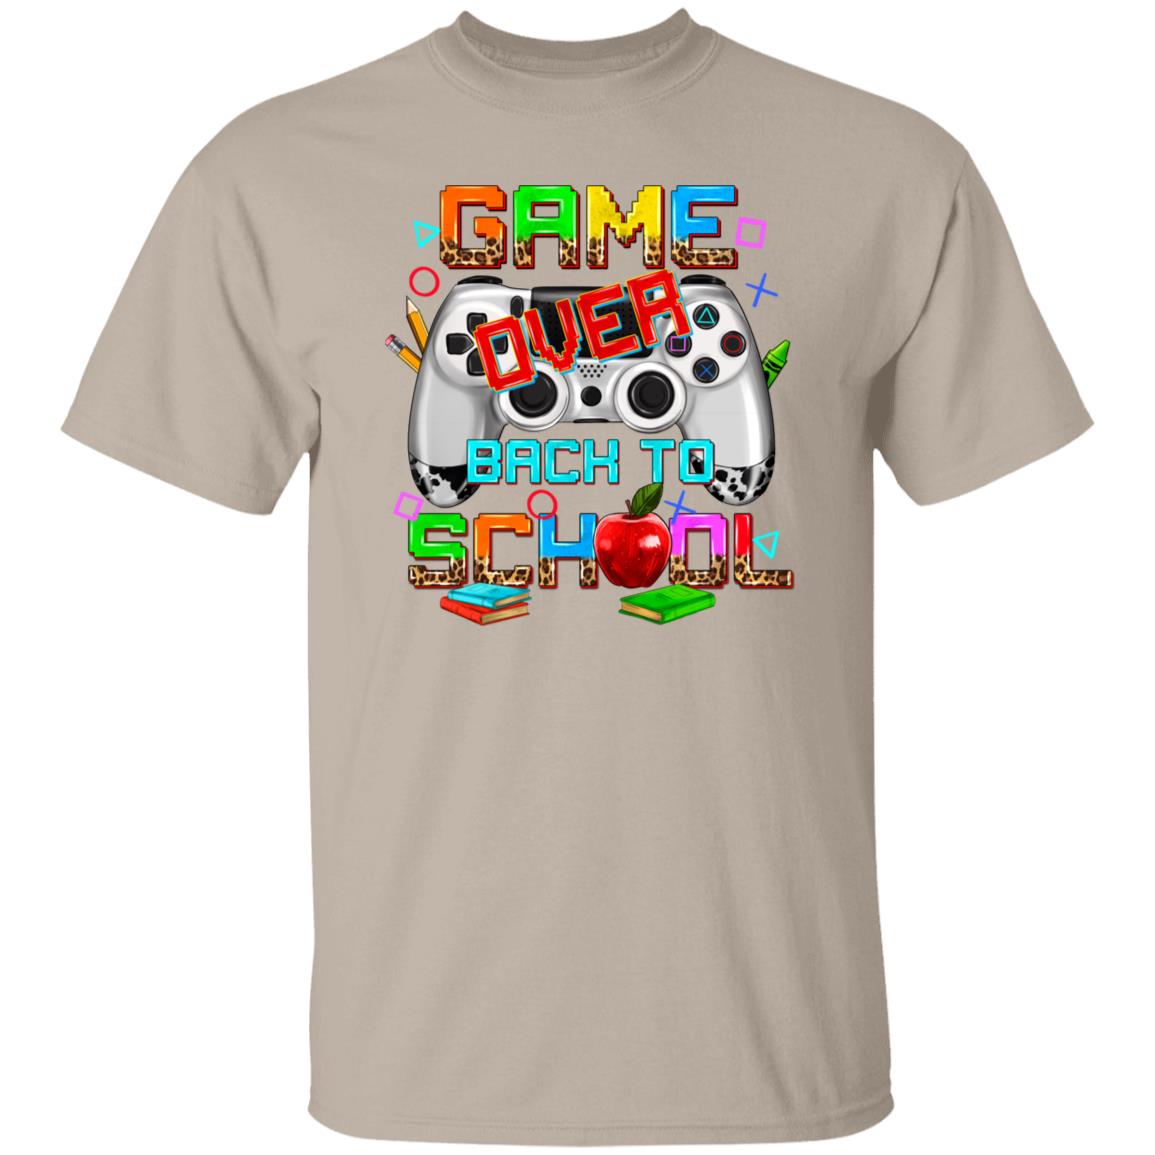 Back to school teacher T-Shirt gift Game over back to school game console Unisex tee Sand White Sport Grey-Family-Gift-Planet